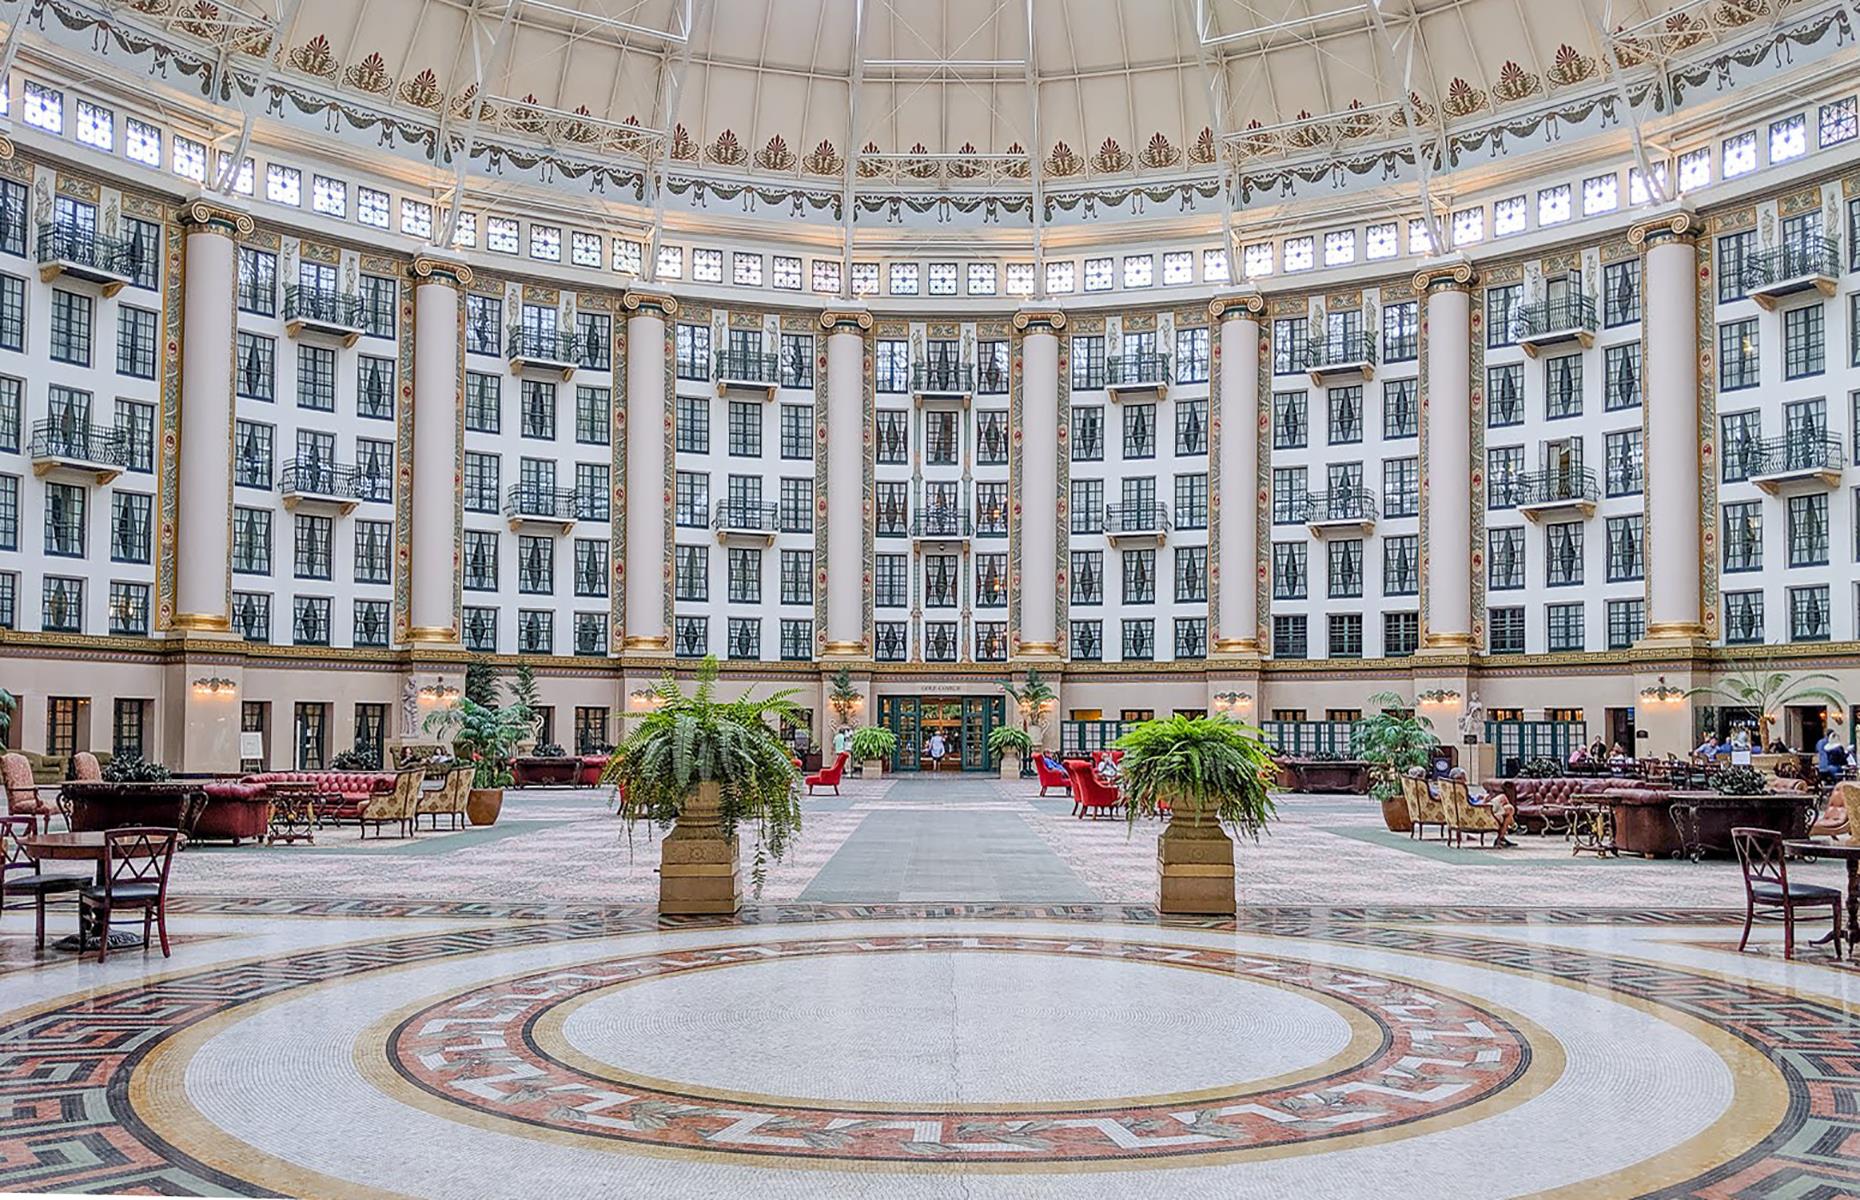 <p>Fancy a spa weekend away? Why not tune into French Lick Resort's <a href="https://www.frenchlick.com/tour/westbaden">virtual tours</a> and imagine you've been whisked away to the West Baden Springs Hotel for the weekend. Start by arriving through the atrium and check-in at the lobby, take a peek inside the library and finally relax at the indoor pool – all are best viewed in full-screen mode. One of America's most historic hotels, once named the eighth wonder of the world, its interiors are chock-full of charming historical detail. </p>